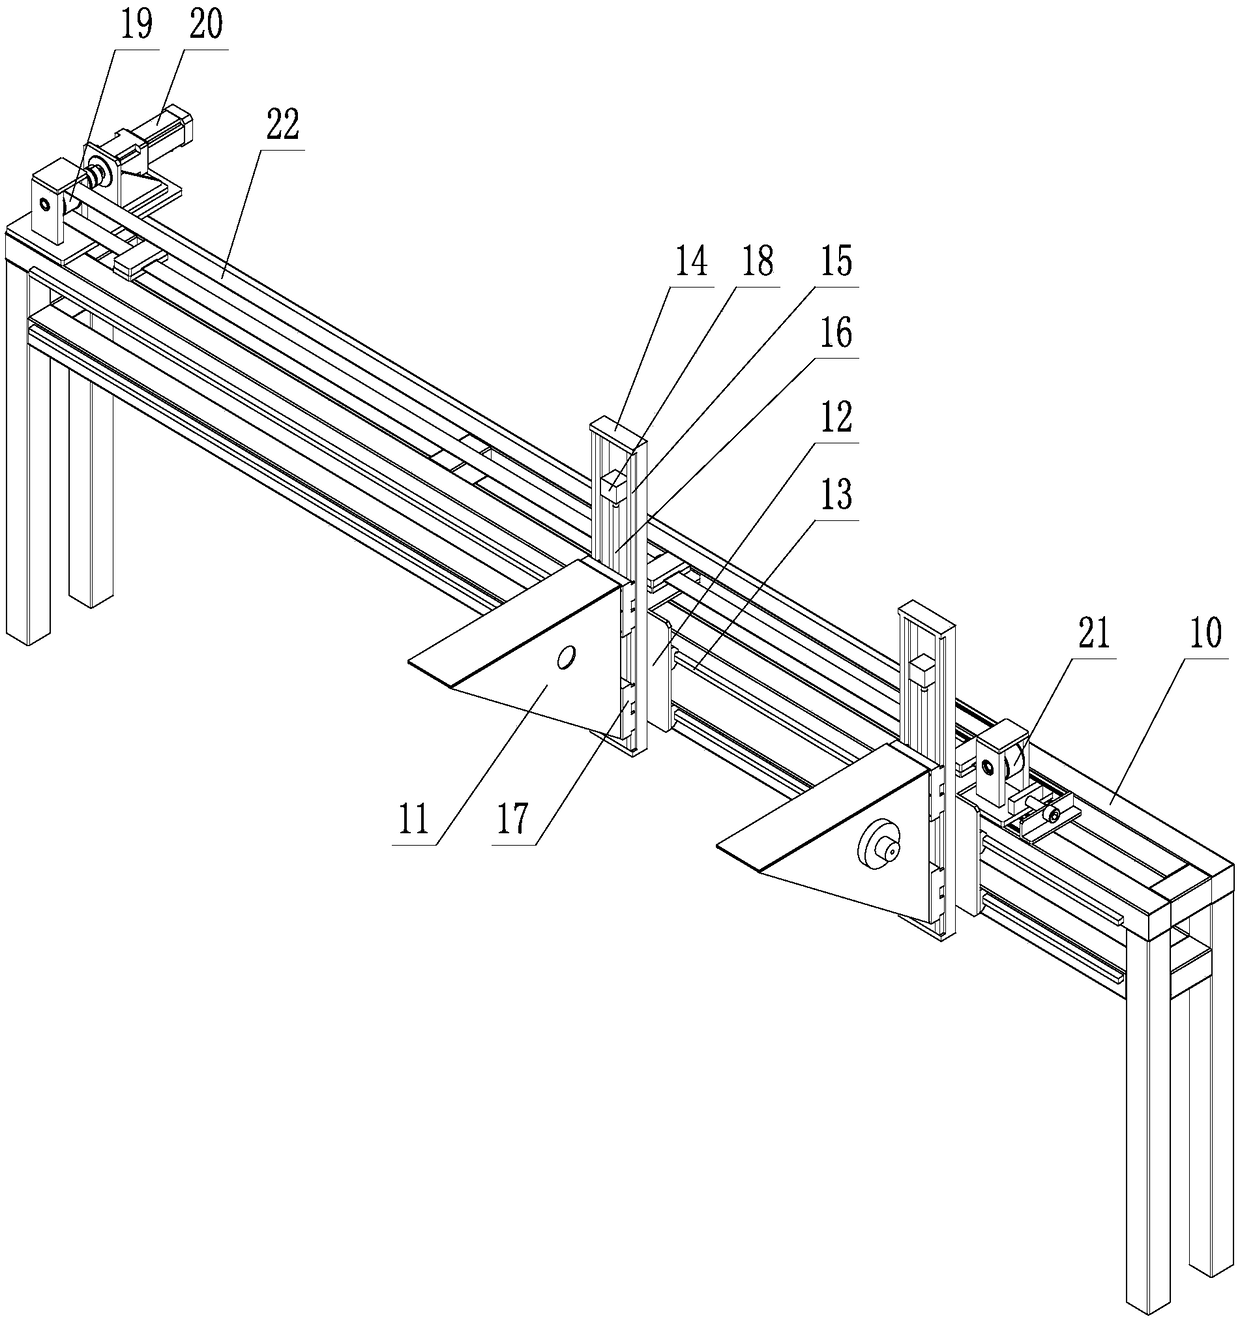 Horizontal-type-structure repairing equipment for stainless-steel-wrapped vertical column remanufacturing